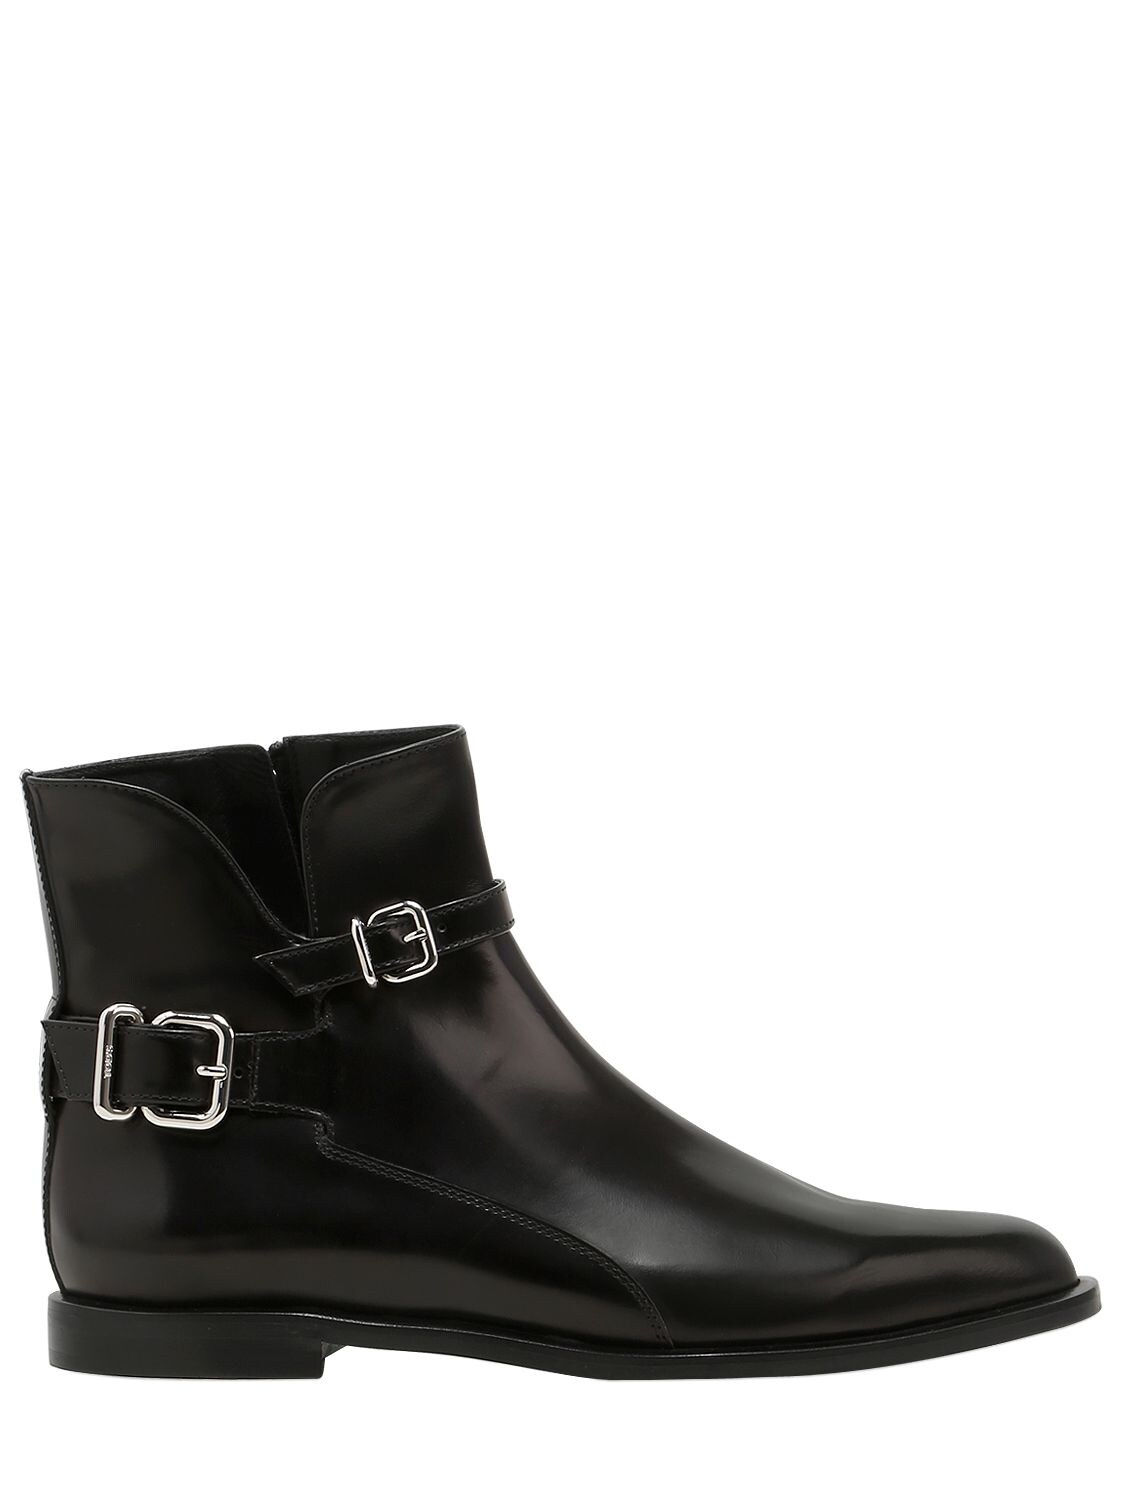 TOD'S 10MM BUCKLED LEATHER ANKLE BOOTS,66IVZJ004-Qjk5OQ2